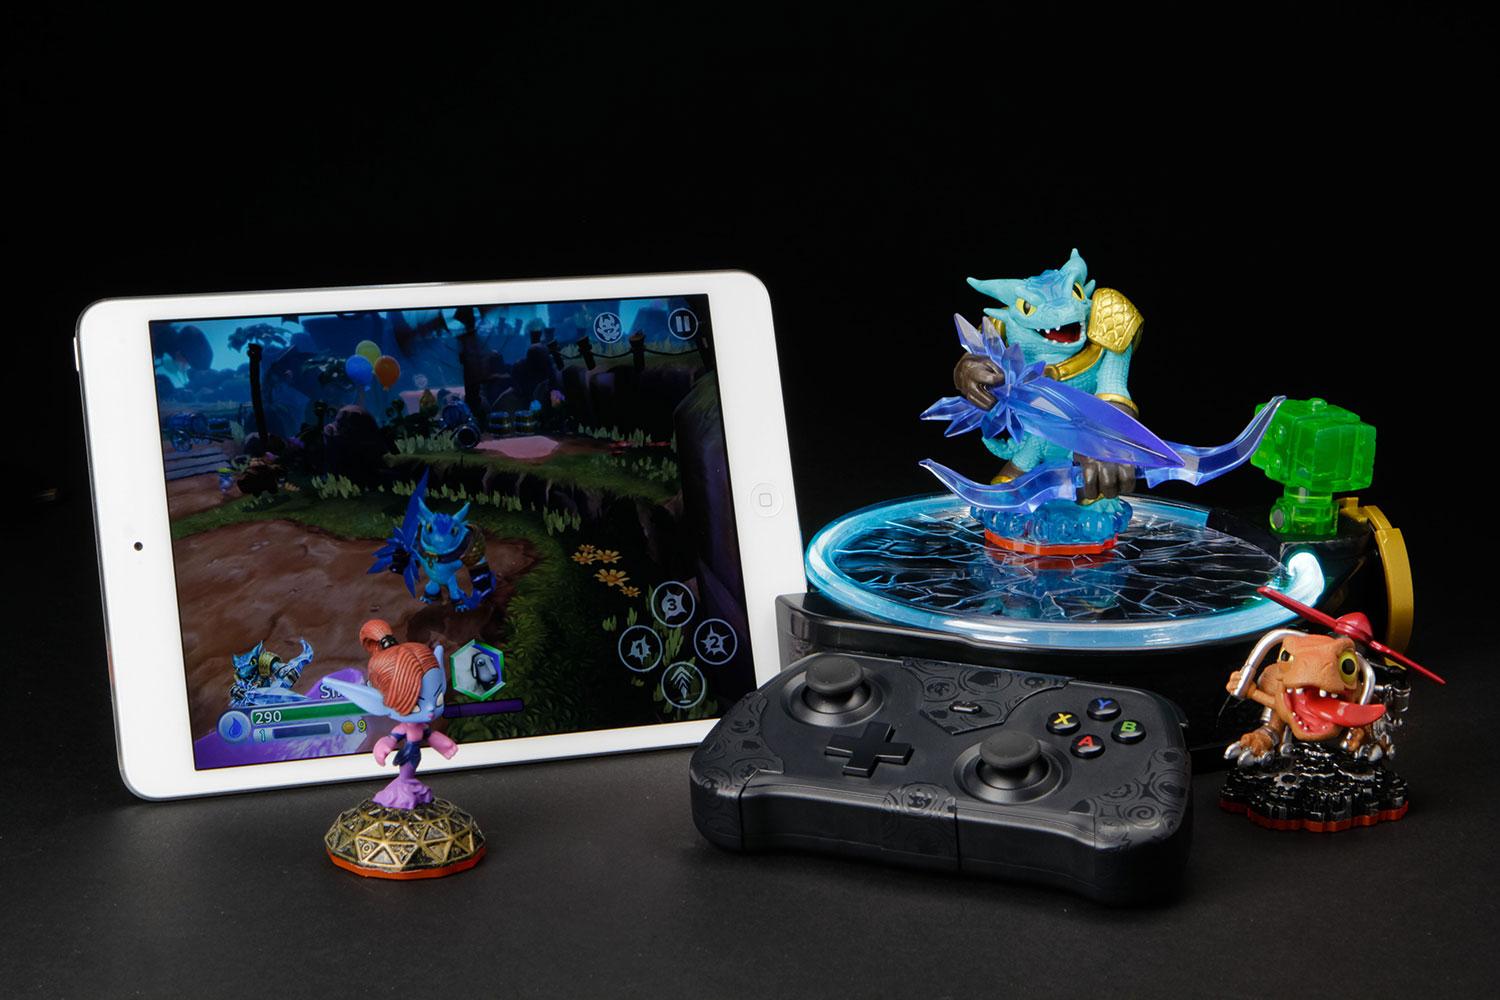 Skylanders: Trap Team review – expensive but well-crafted entertainment, Games